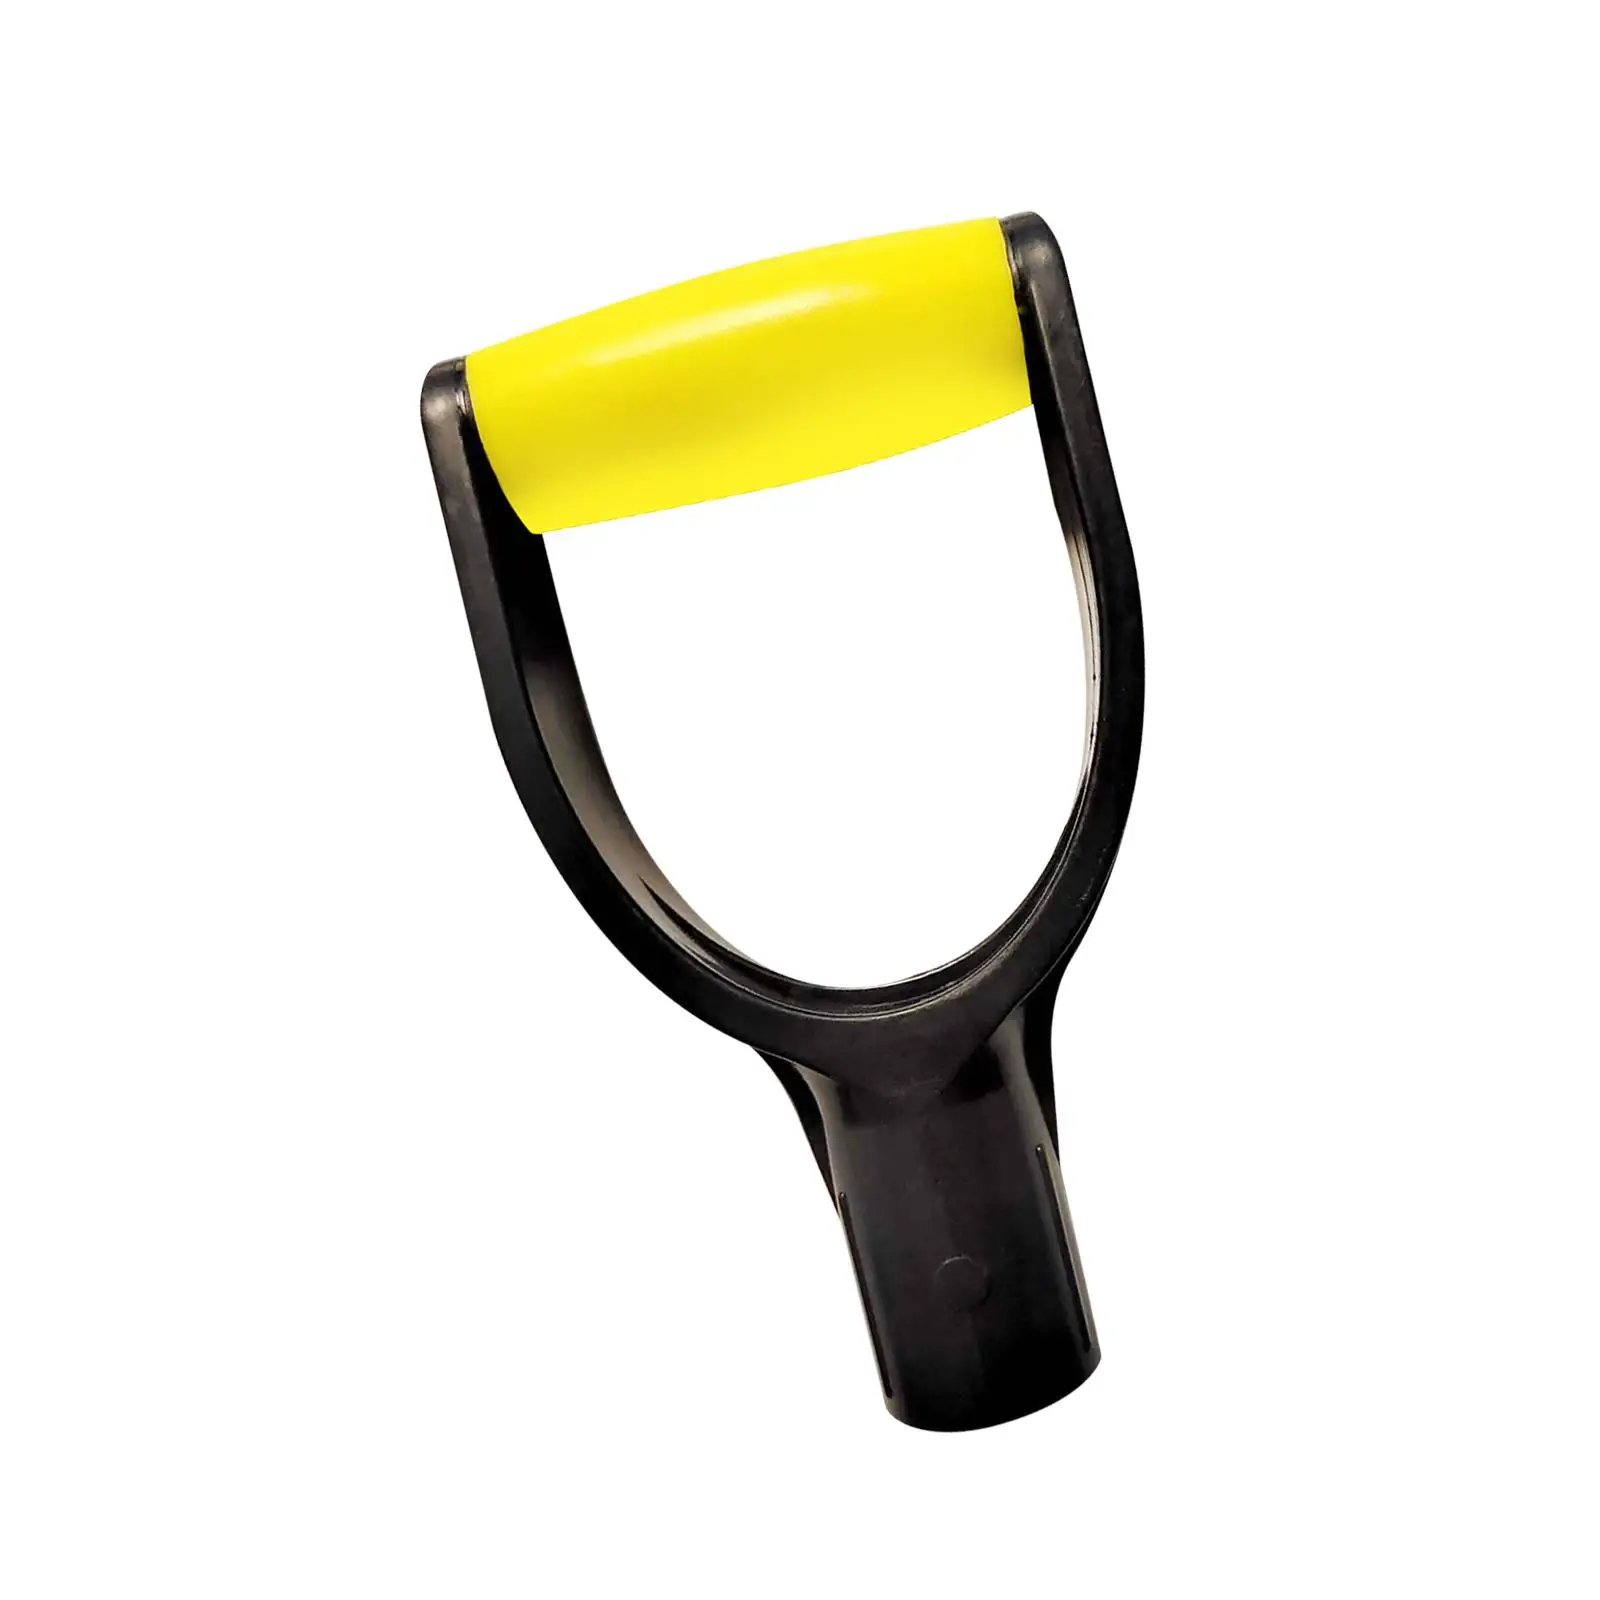 Shovel Handle Grip D Handle Replaces Attachment Sturdy Push Brooms Easy Installation Shovel Grip for Yard Gardening Raking Tools